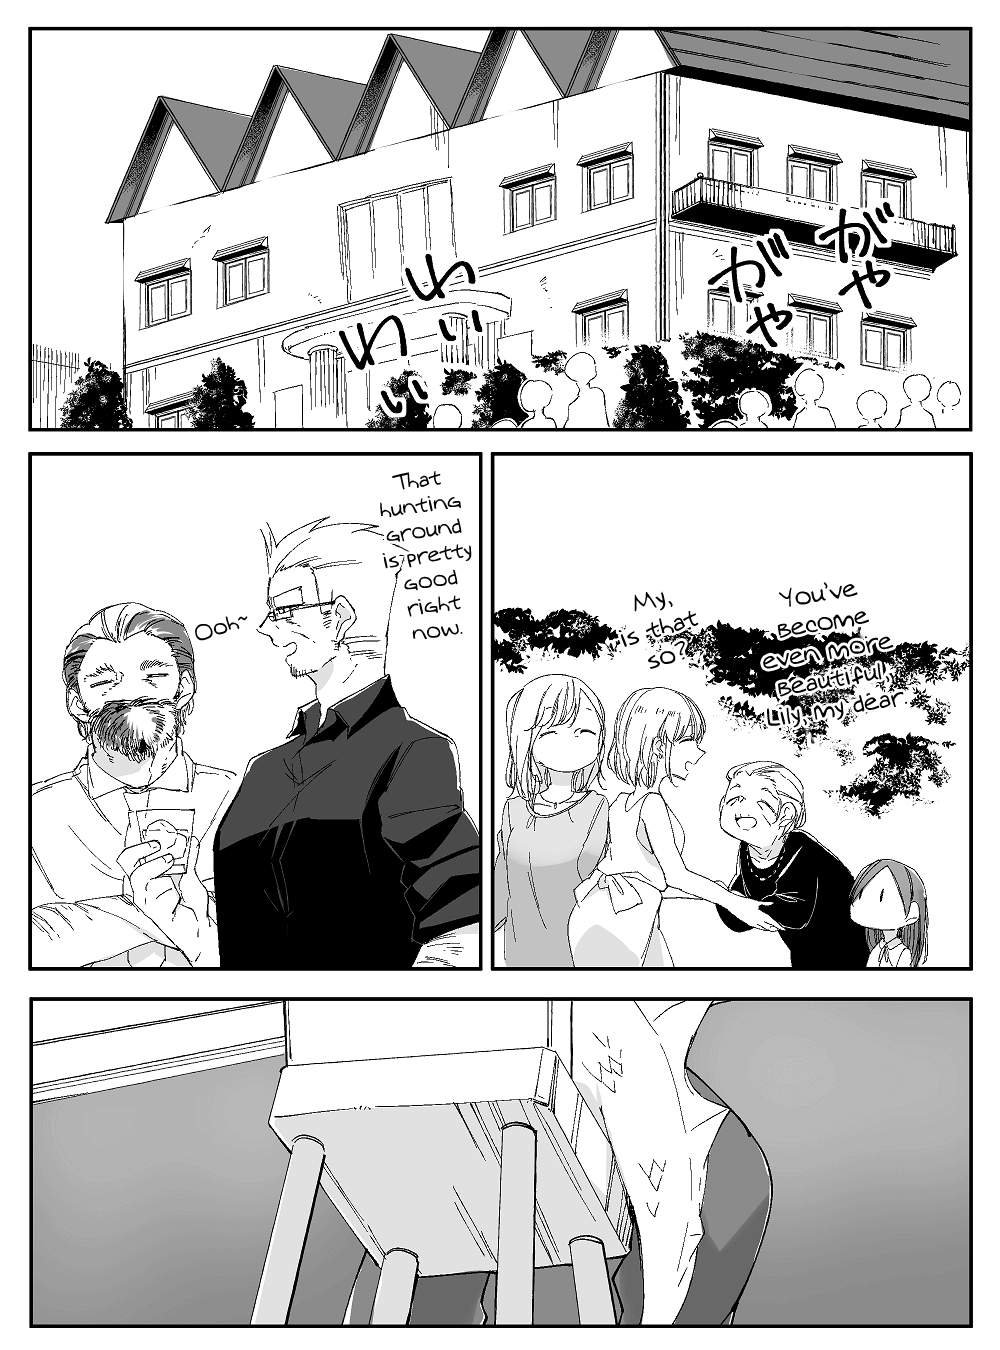 Beauty And The Beast Girl - Page 1